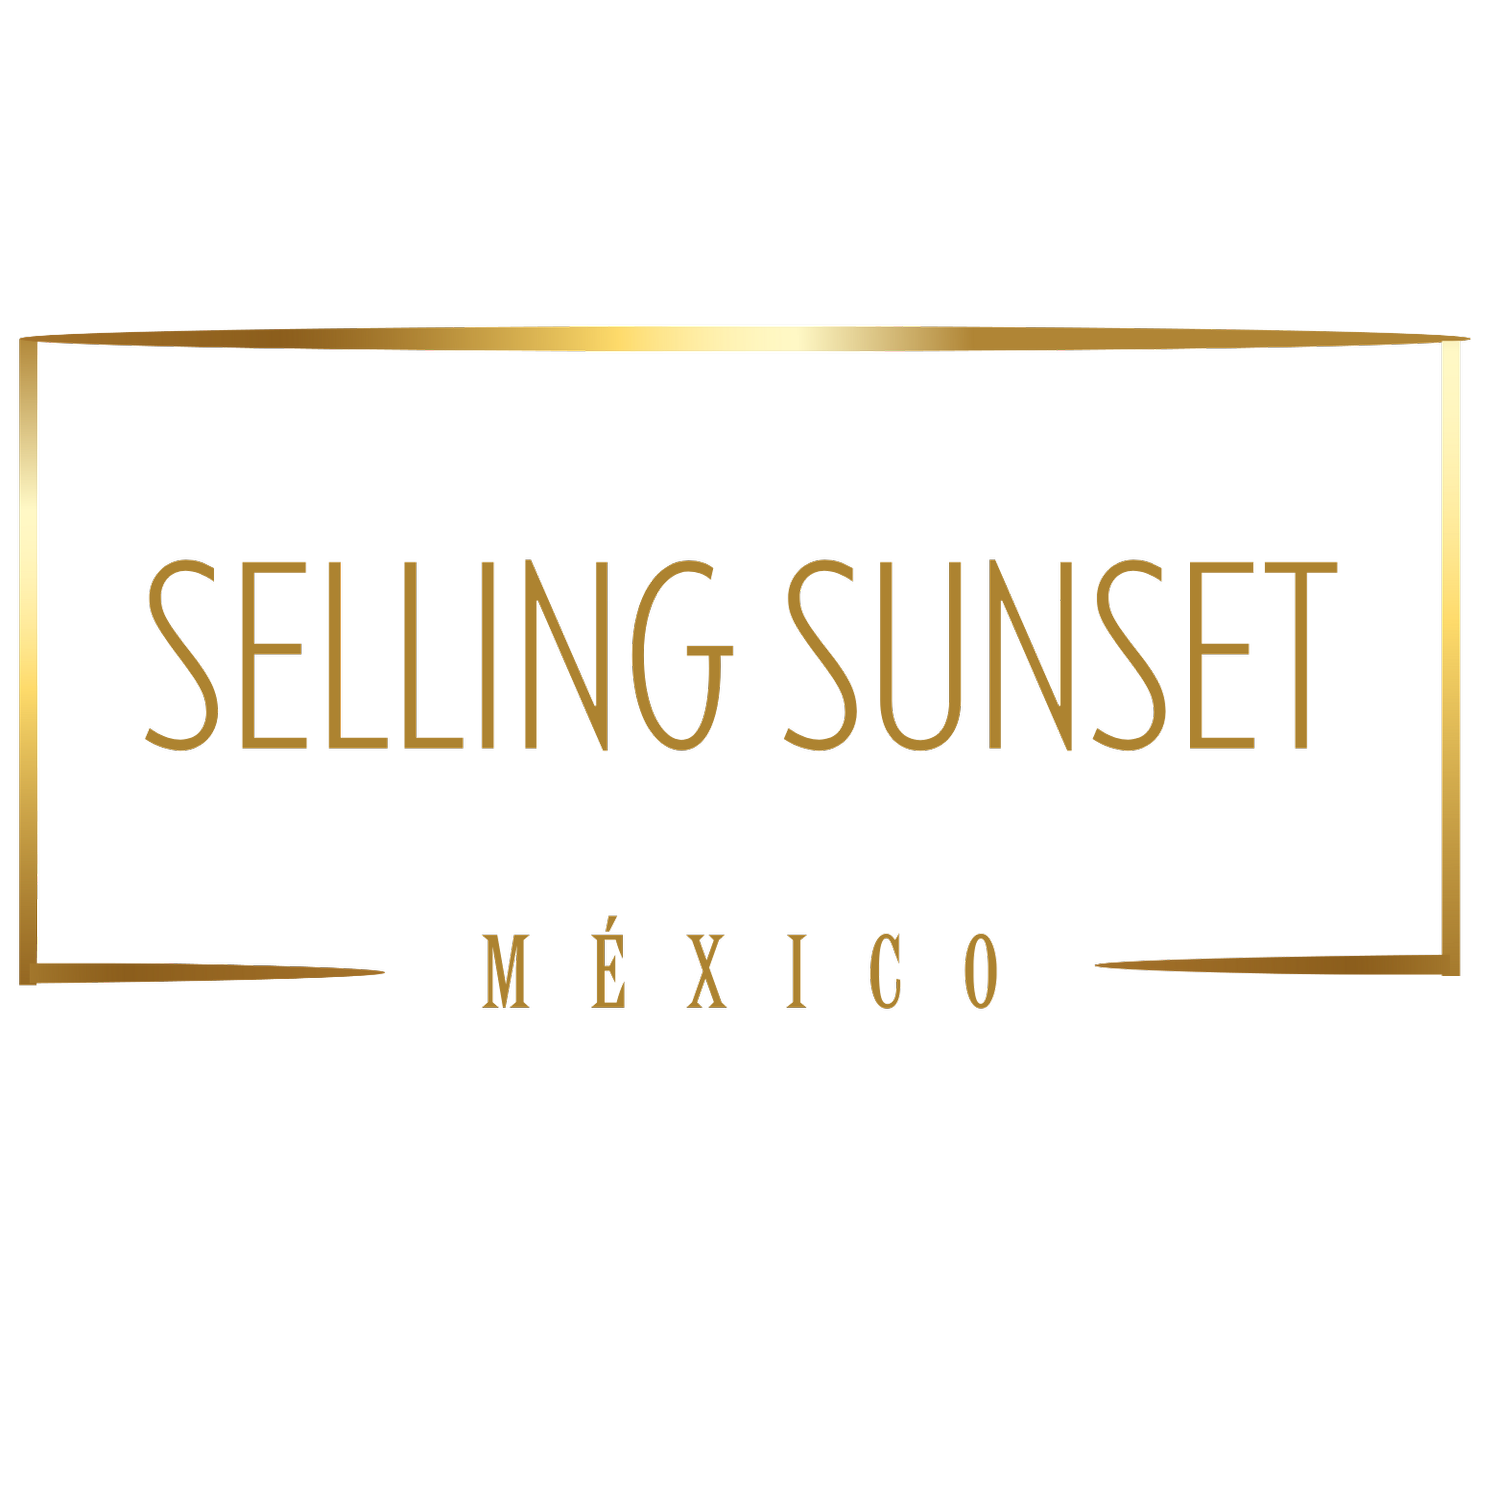 SELLING SUNSET MEXICO